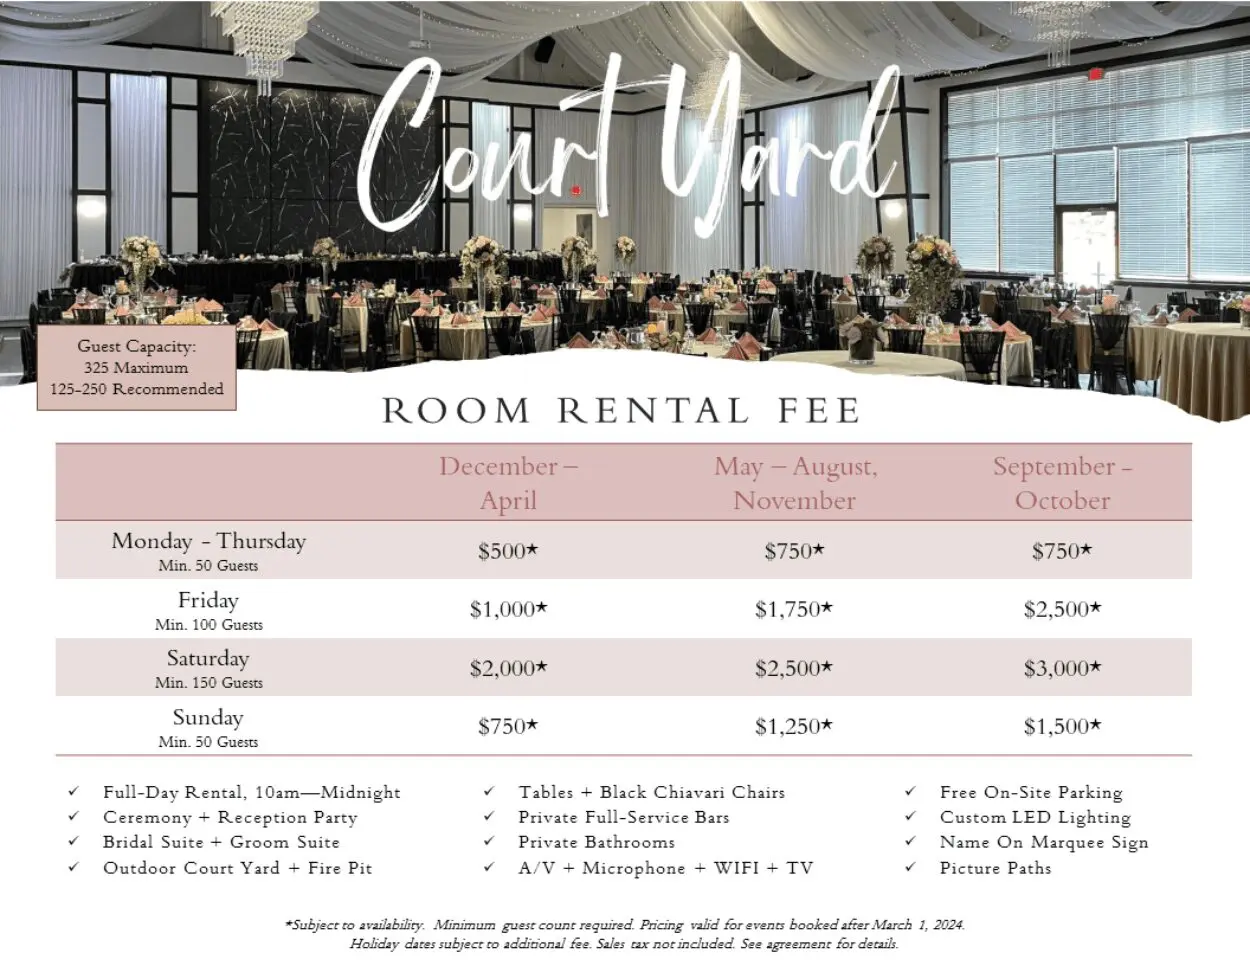 A table with a price list for the room rental fee.